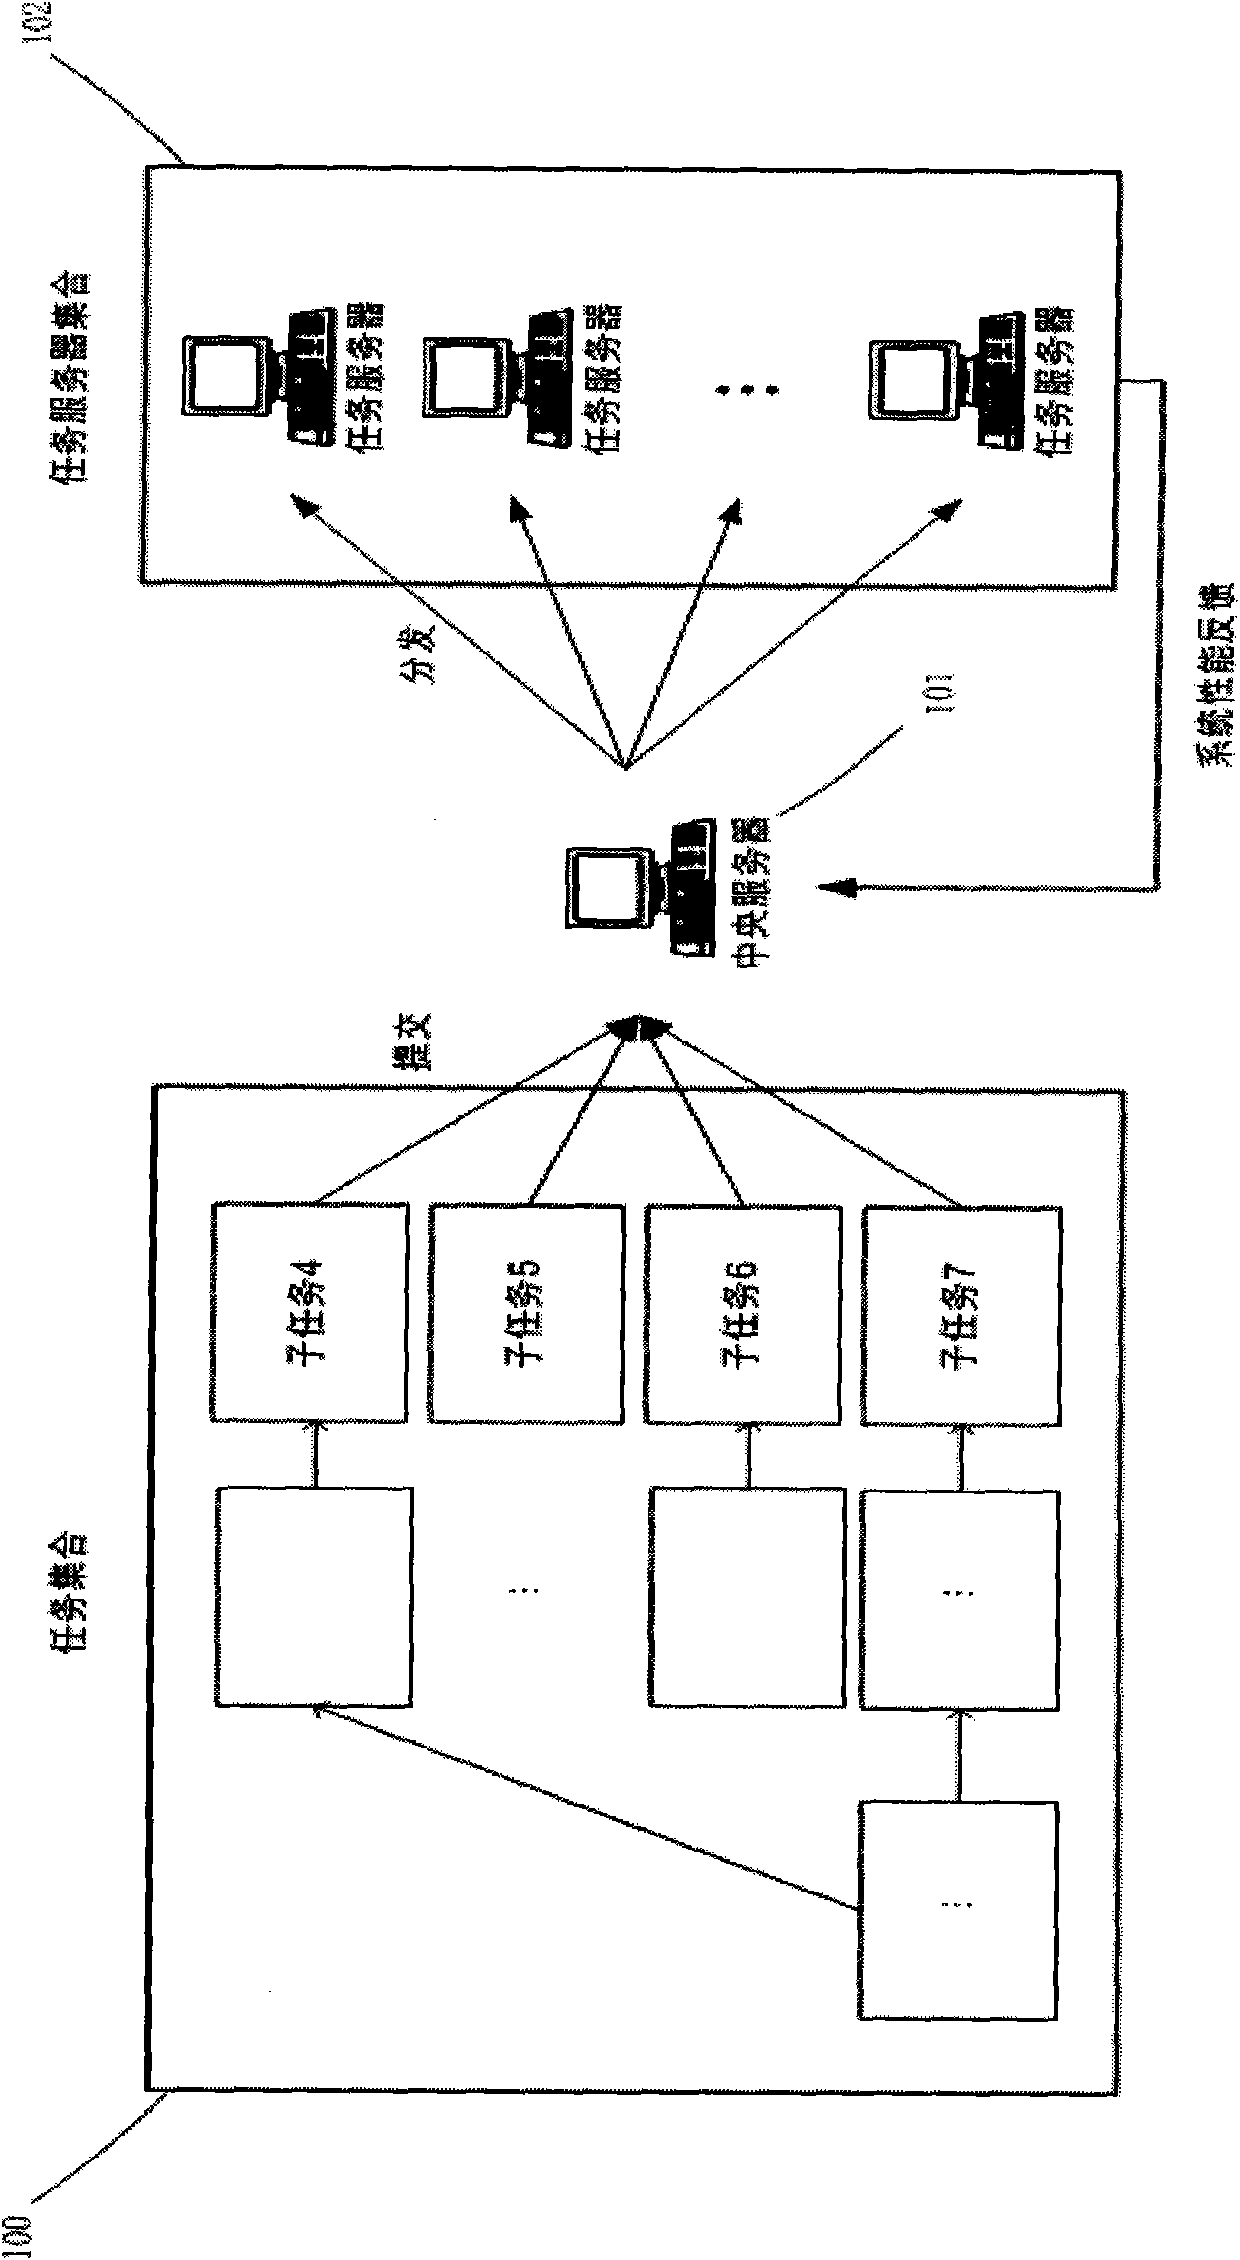 Task scheduling method for processing real-time traffic information